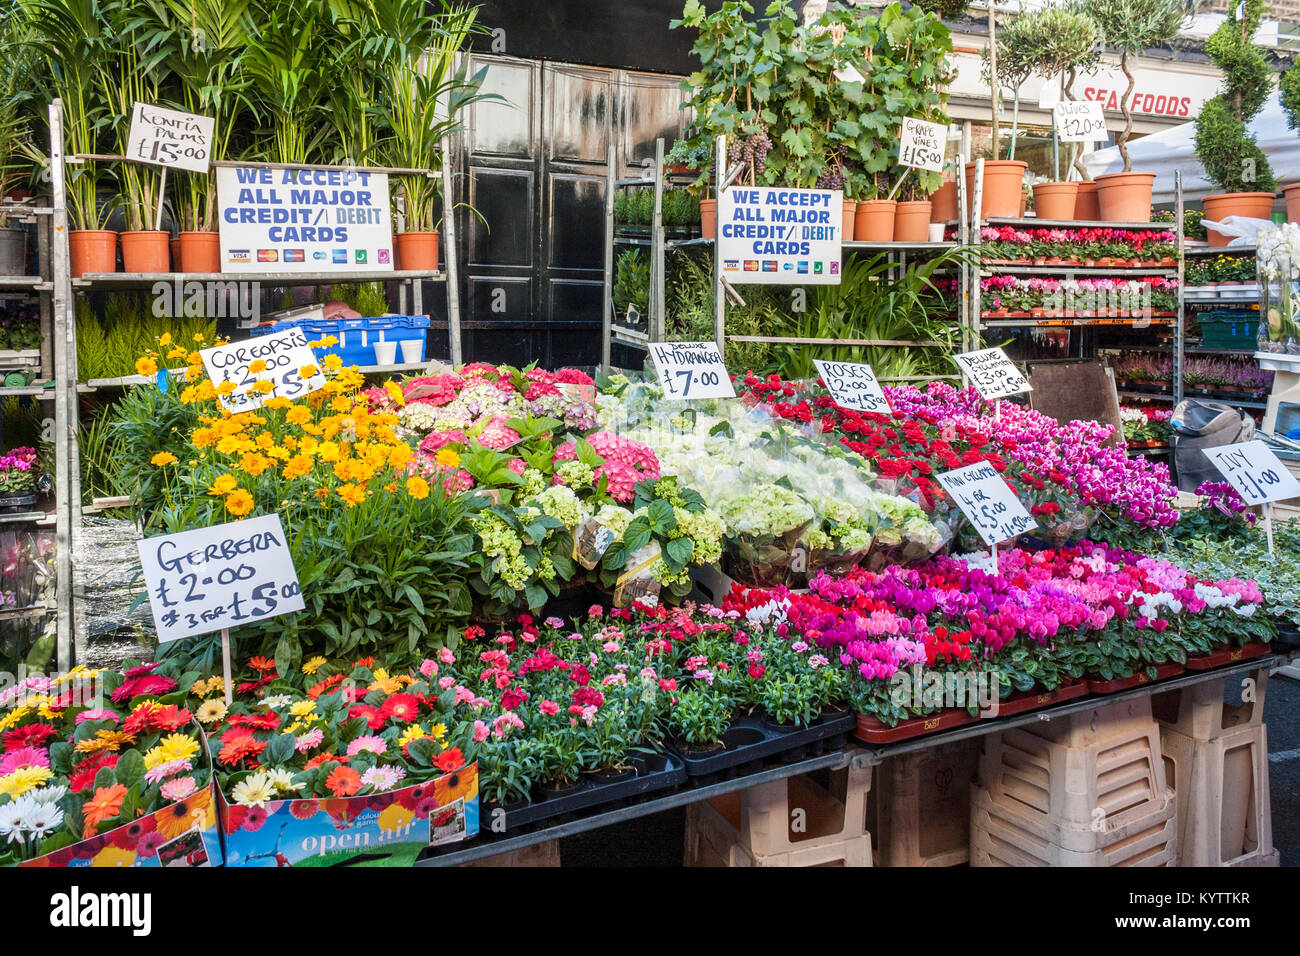 Columbia Road Flower Market stall without People, Columbia Road, Londres, Angleterre, GB, ROYAUME-UNI Banque D'Images